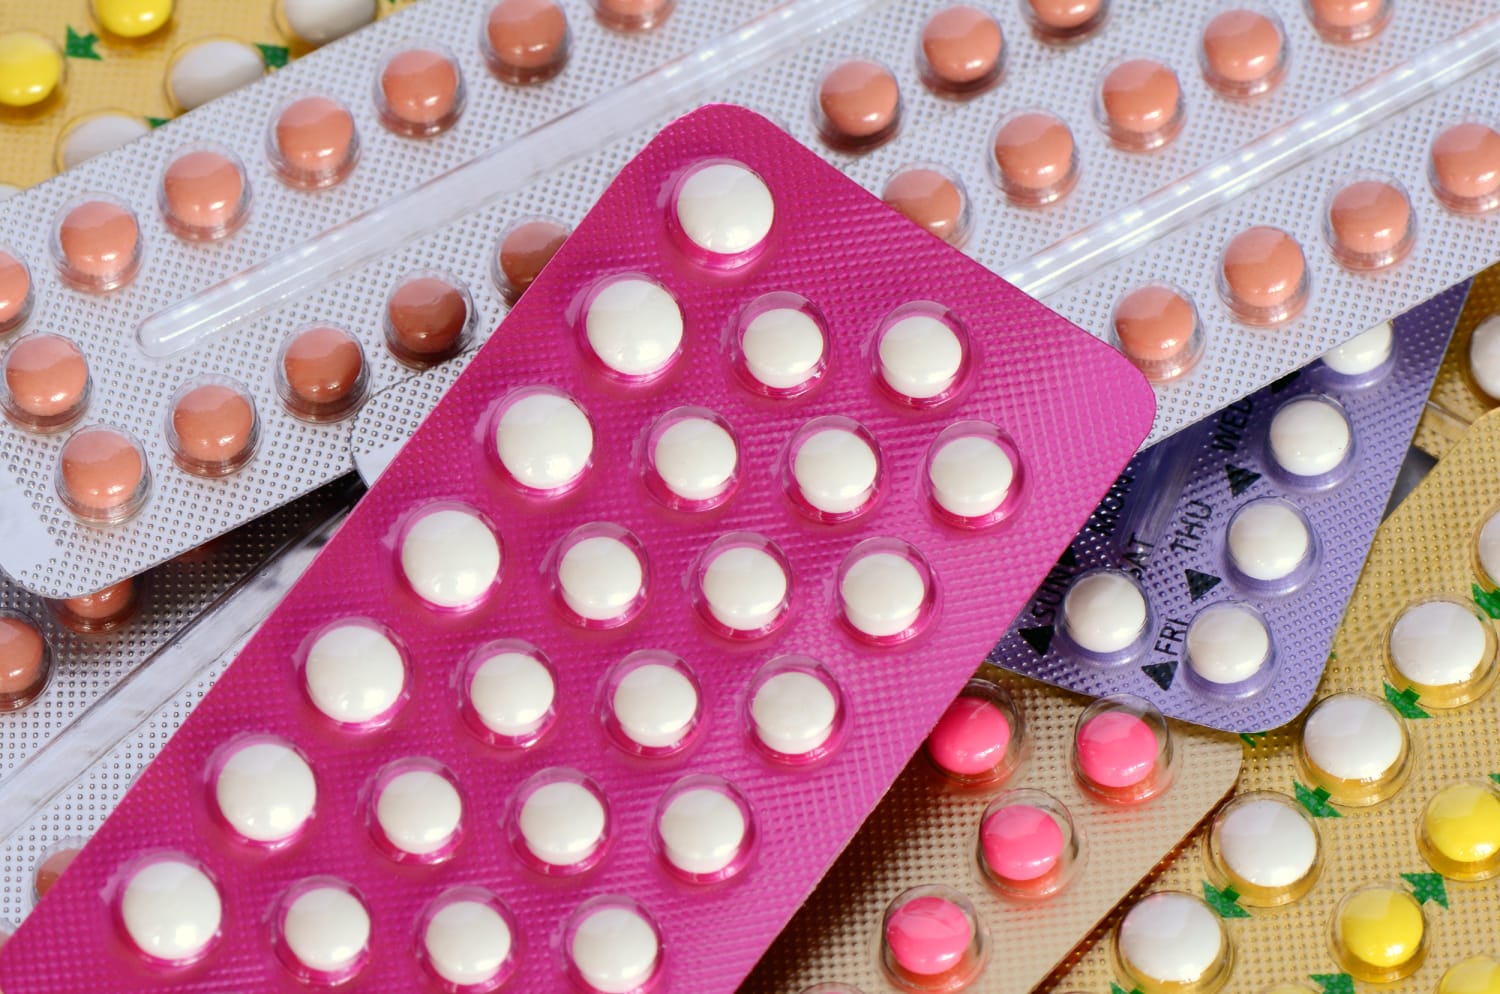 is it safe to buy birth control pills online?